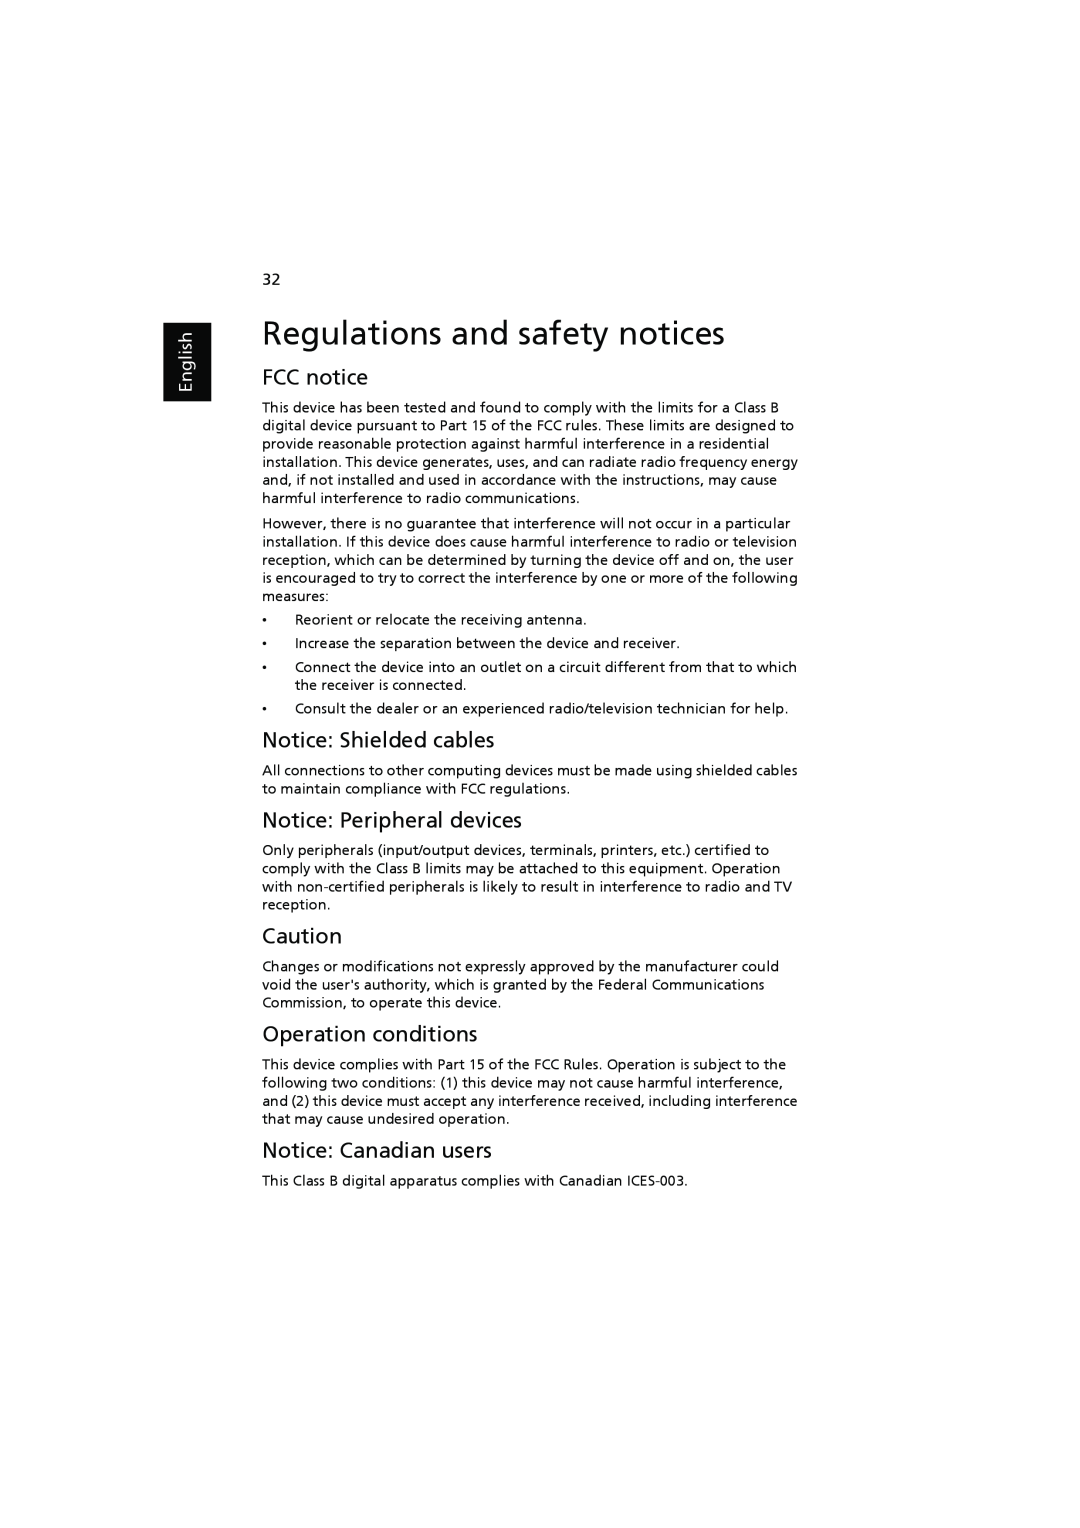 Acer K11 manual Regulations and safety notices, FCC notice, Notice Shielded cables, Notice Peripheral devices, English 